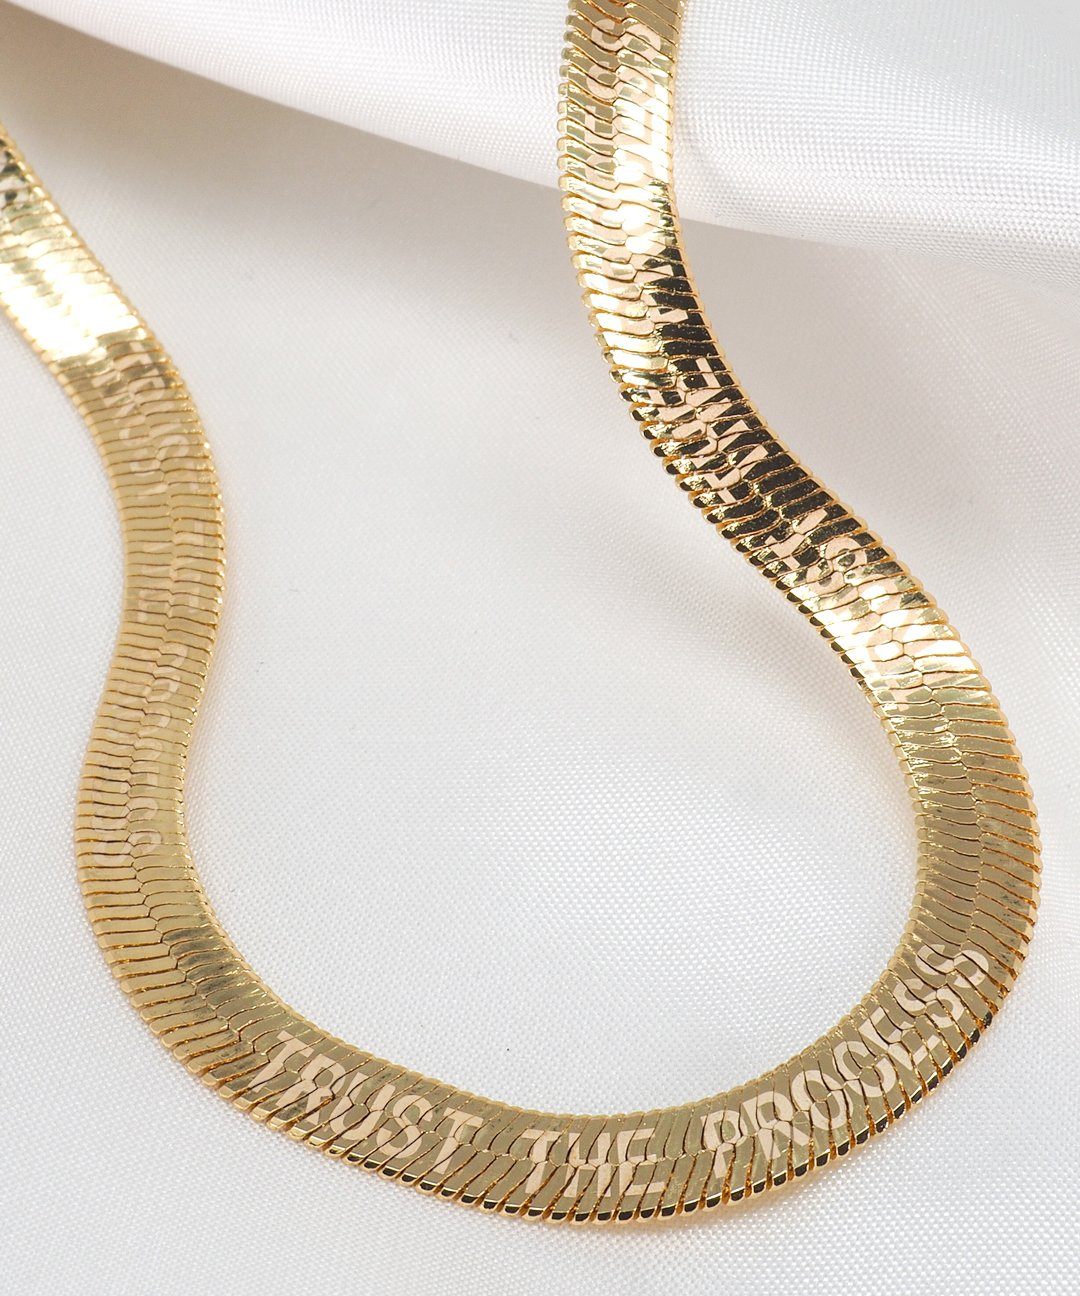 TRUST THE PROCESS Herringbone Necklace Necklaces The Giving Keys | Lifestyle